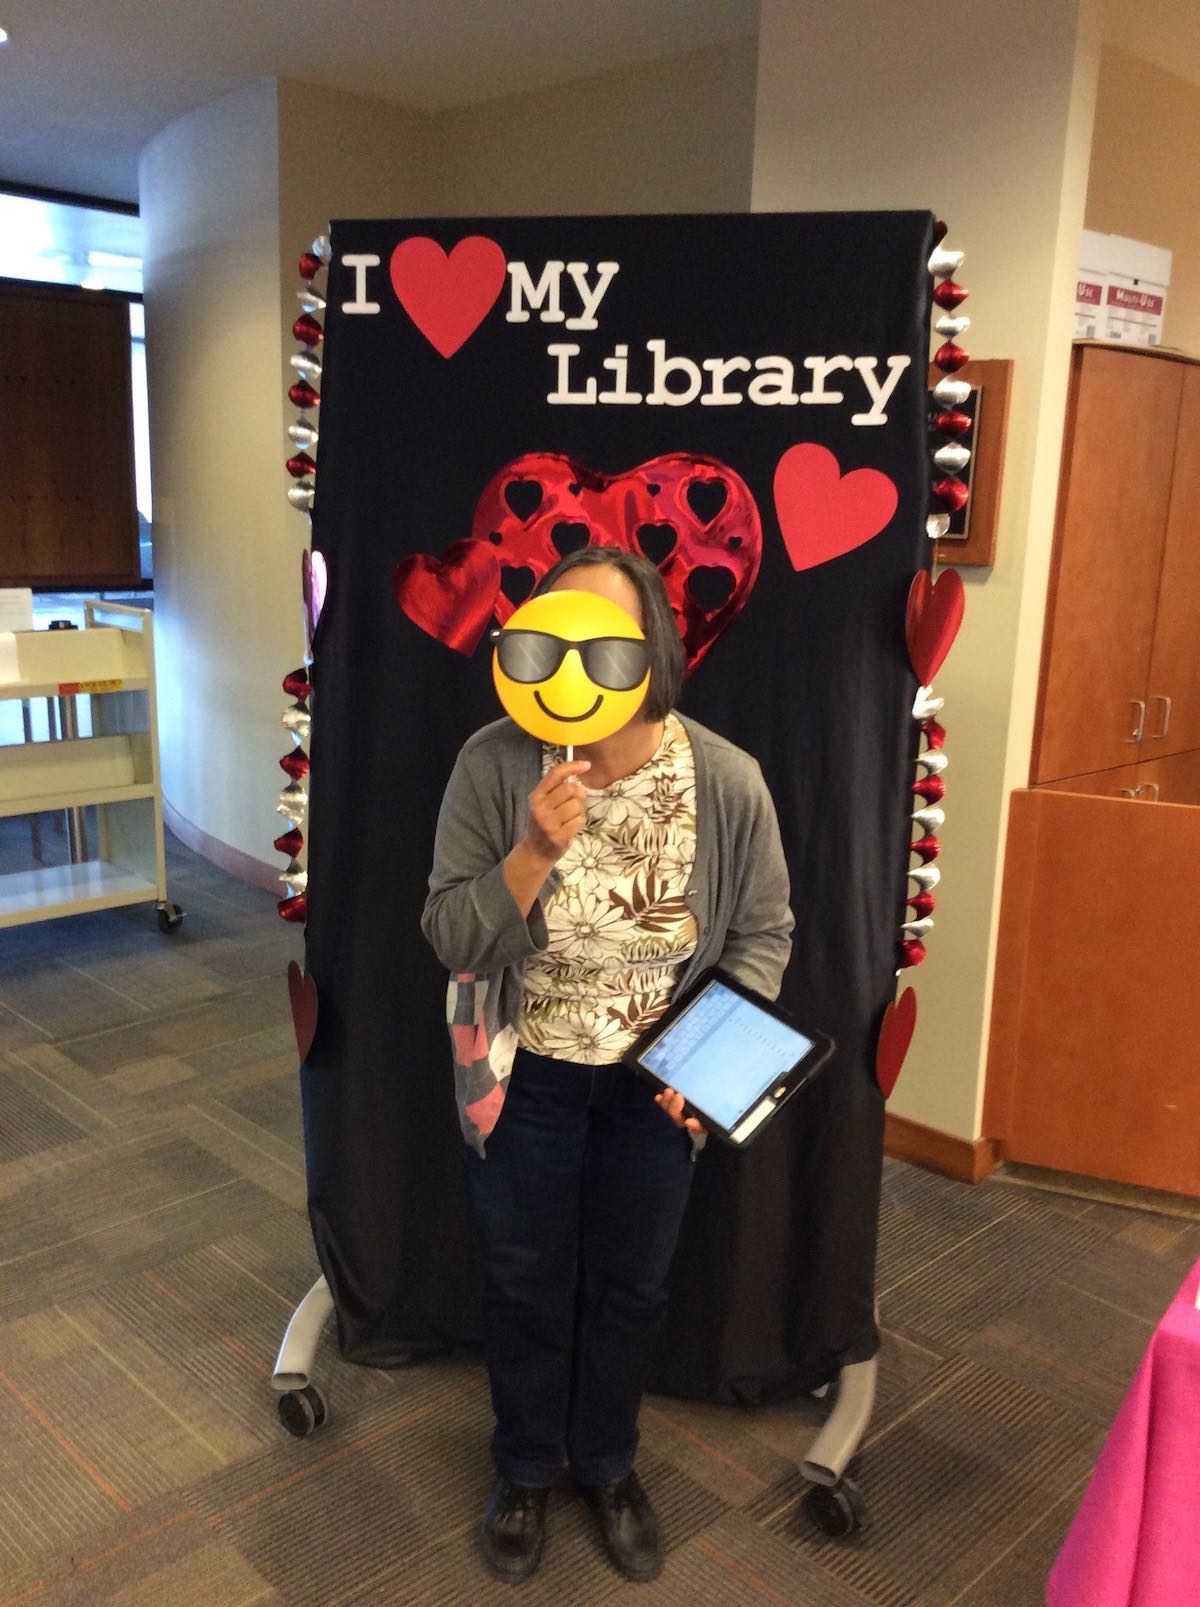 Library User Services Assistant Cecilia Gallardo stands in front of the I love my library backdrop holding up a prop of a smiling sunglasses emoji, covering her face with it